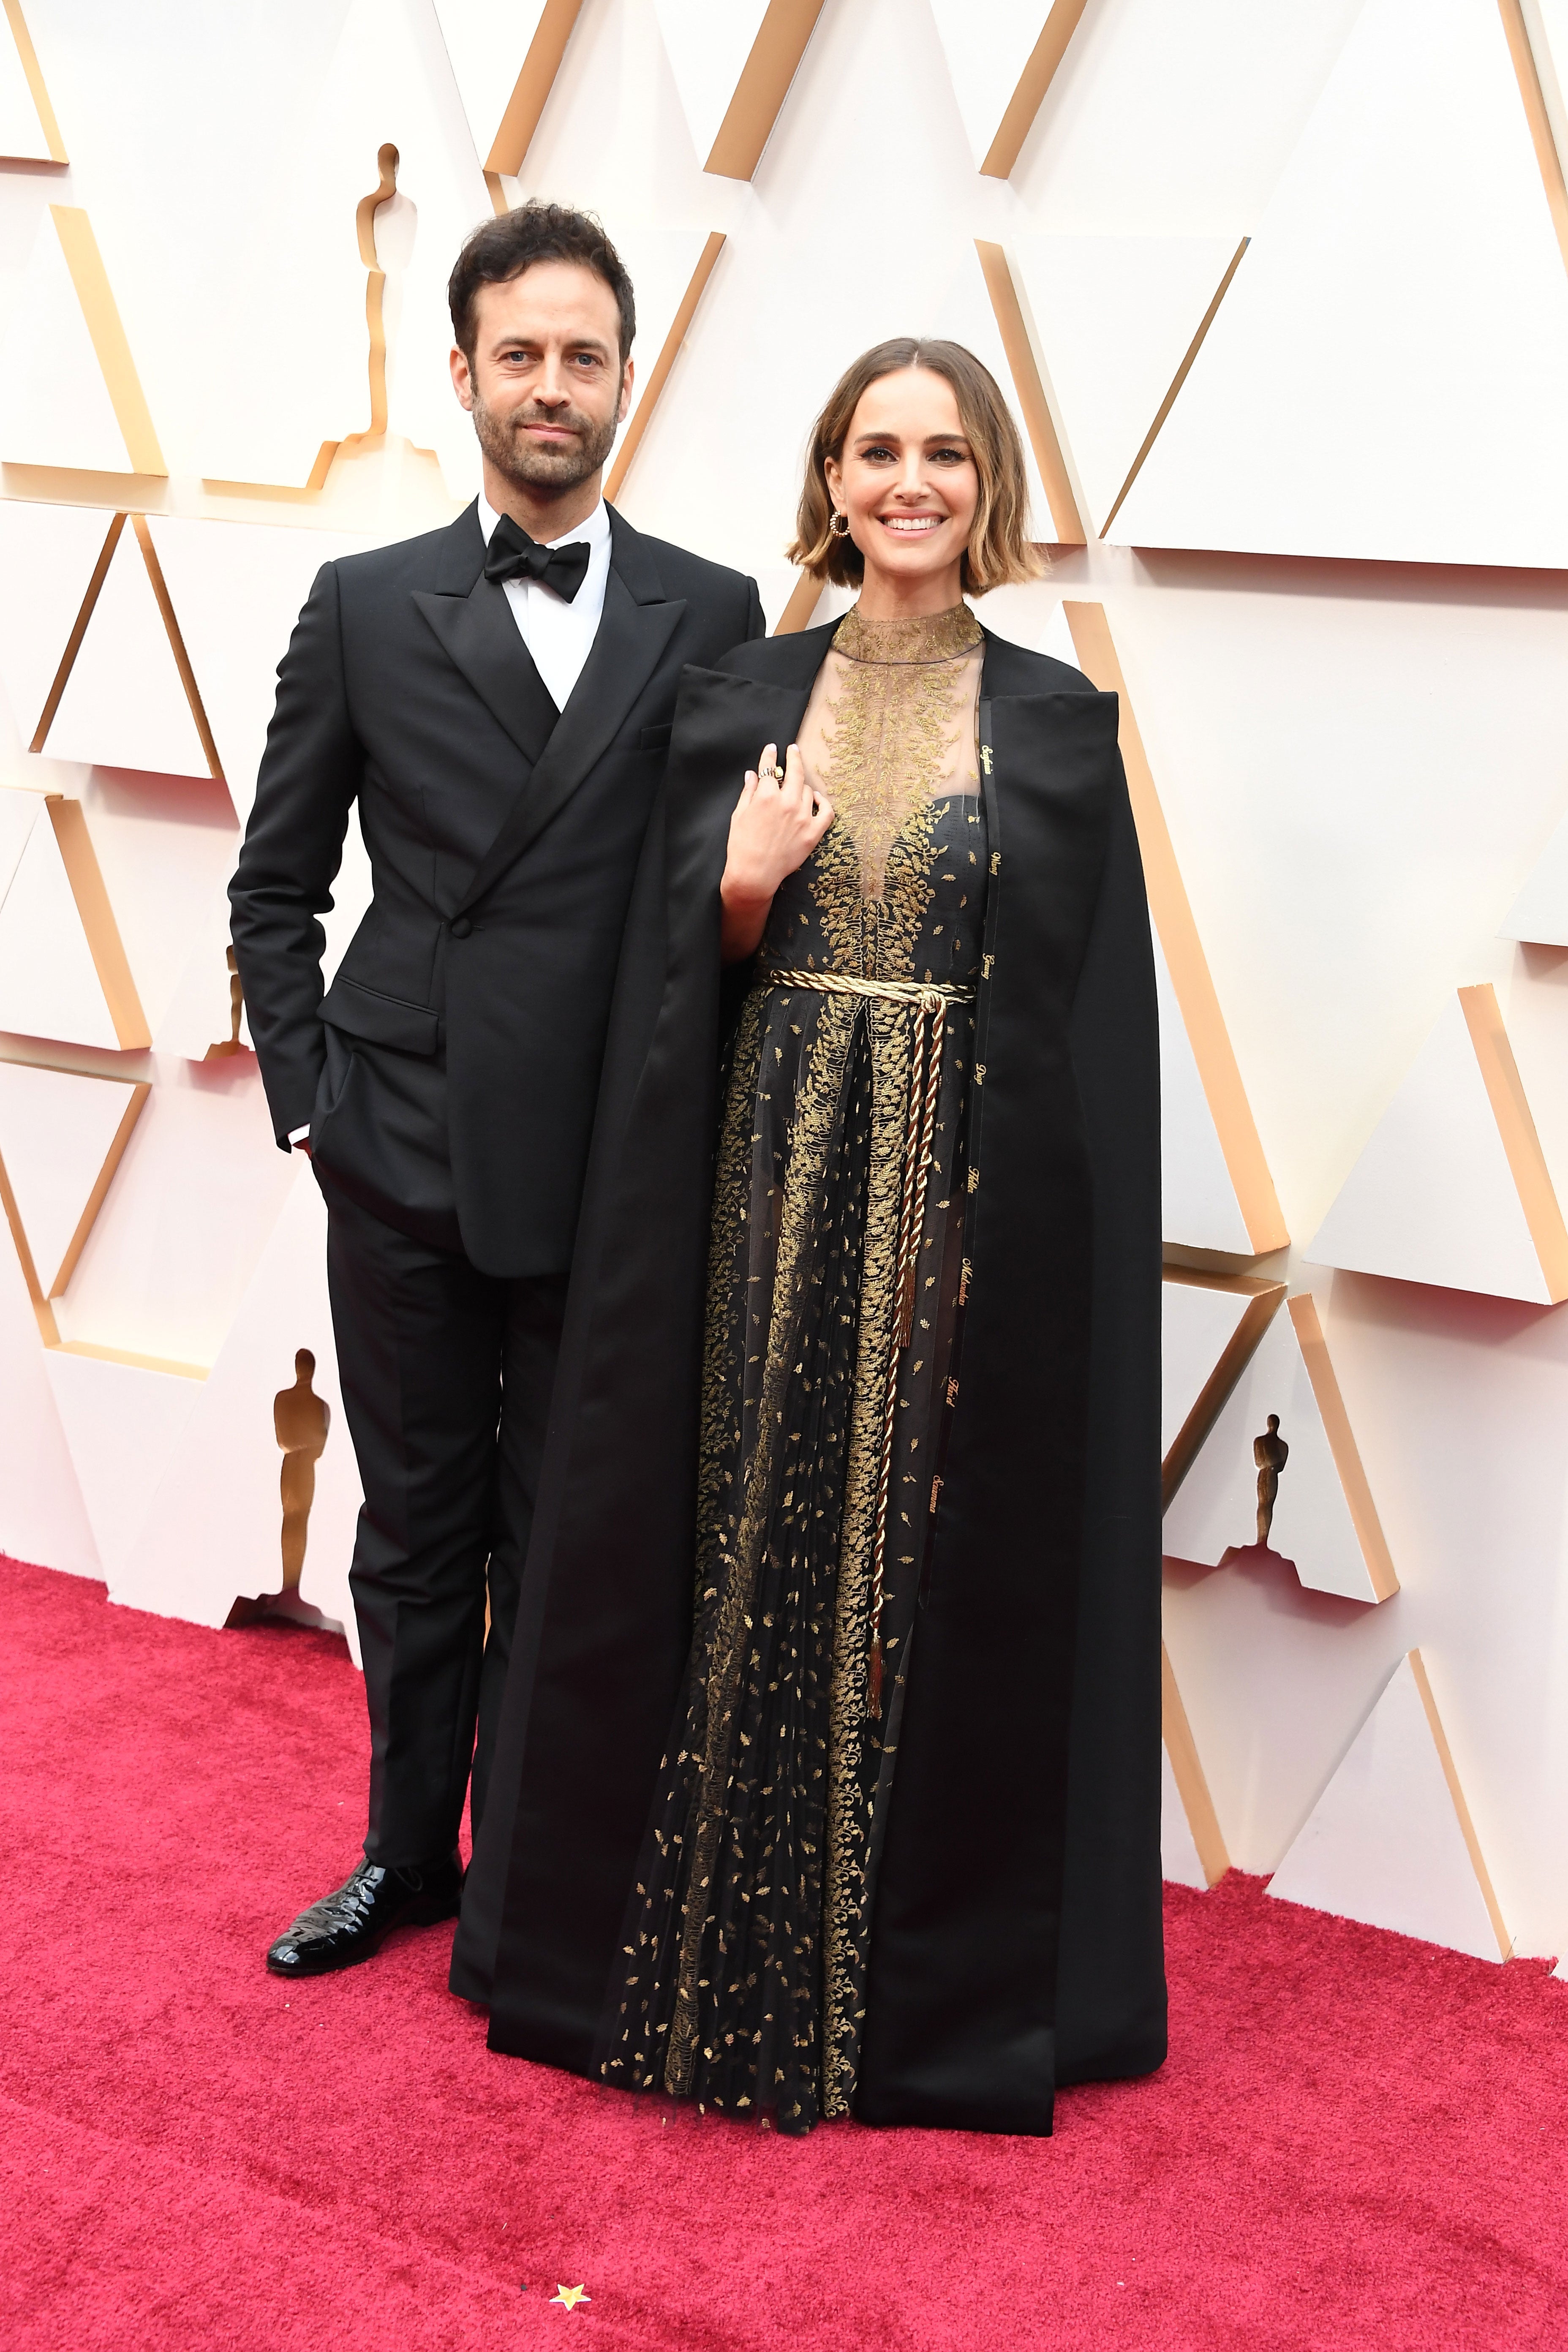 Oscars 2020: Natalie Portman wears dress emroidered with names of female  directors snubbed, The Independent